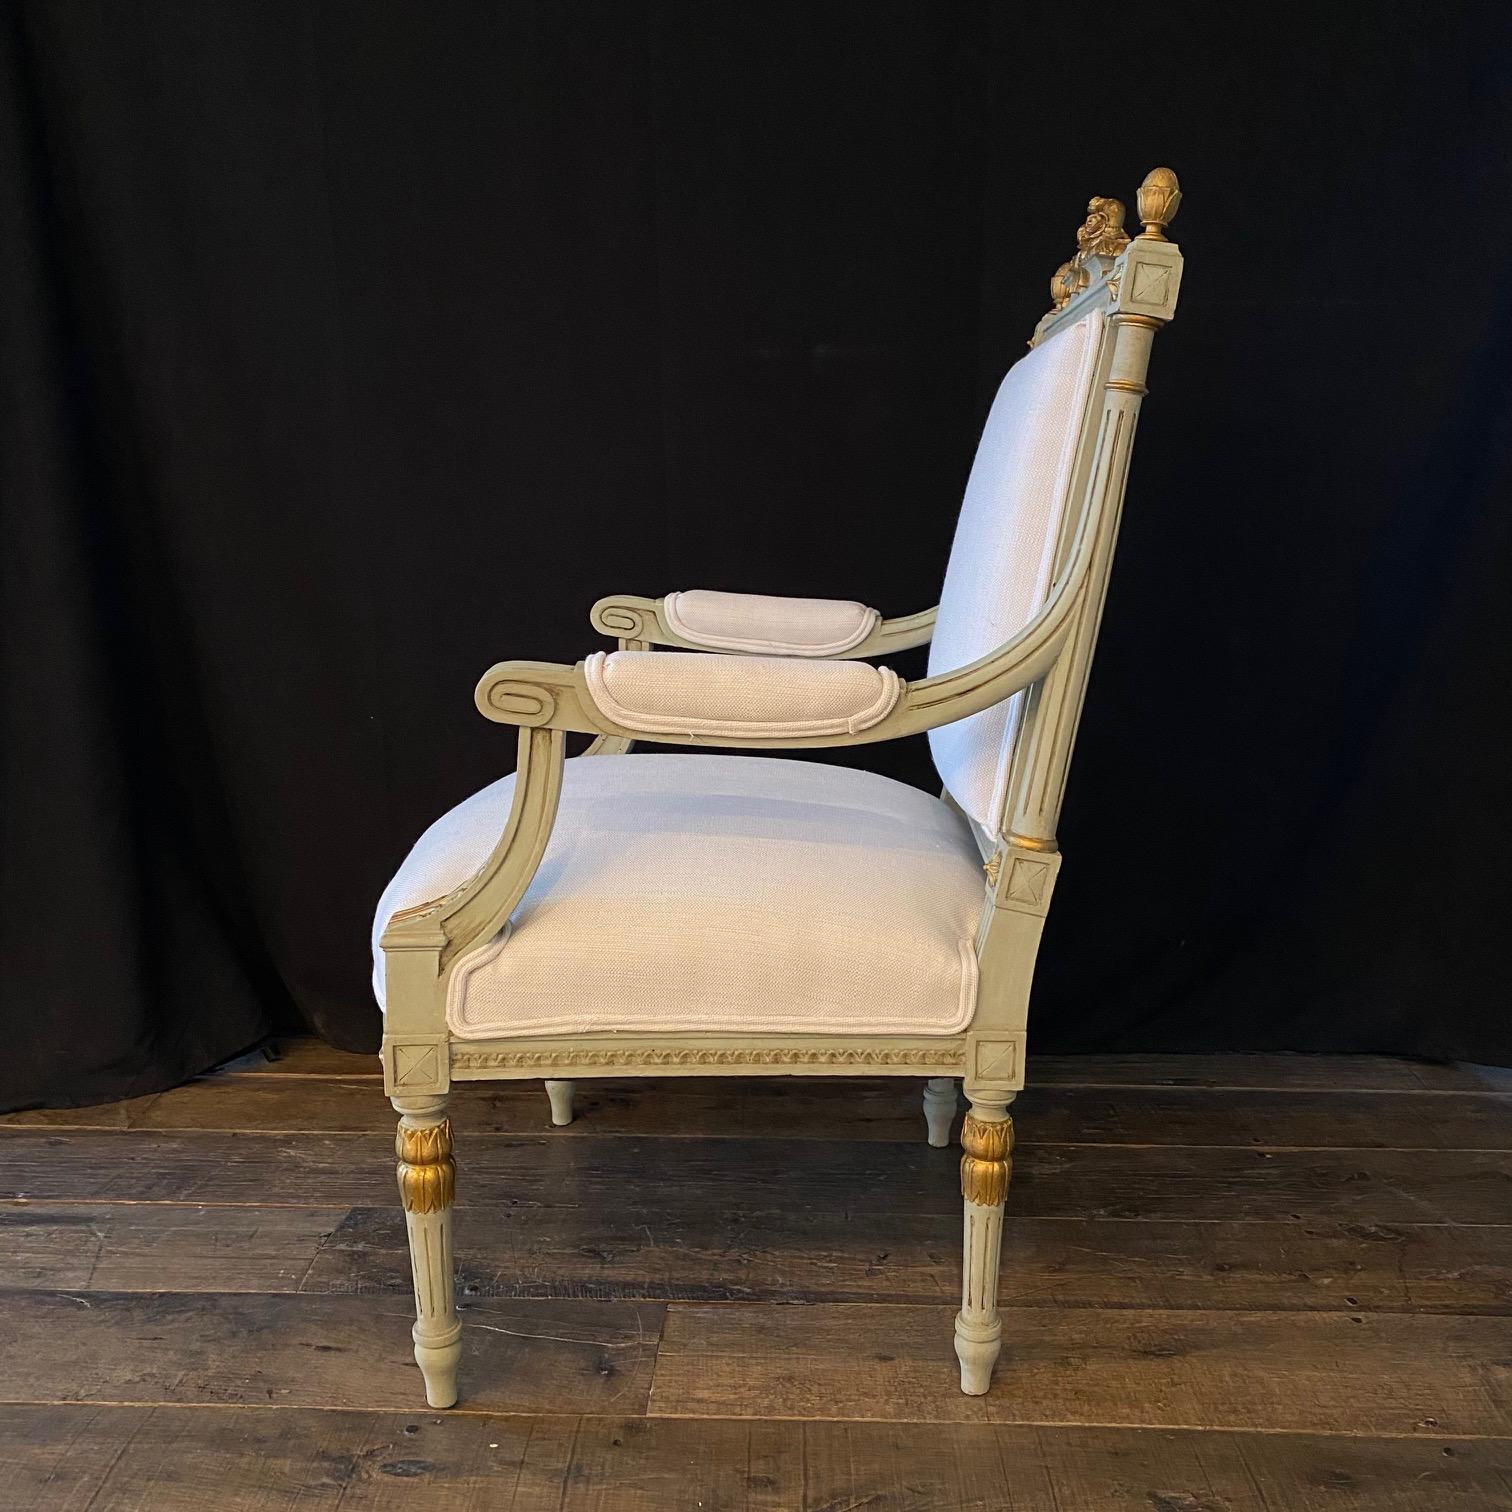 Elegant pair of French Louis XVI neoclassical armchairs having stunning Silhouette with carved painted wooden frame and new high quality British cotton/linen neutral fabric upholstery. The chairs have a square back rest and seat carved with